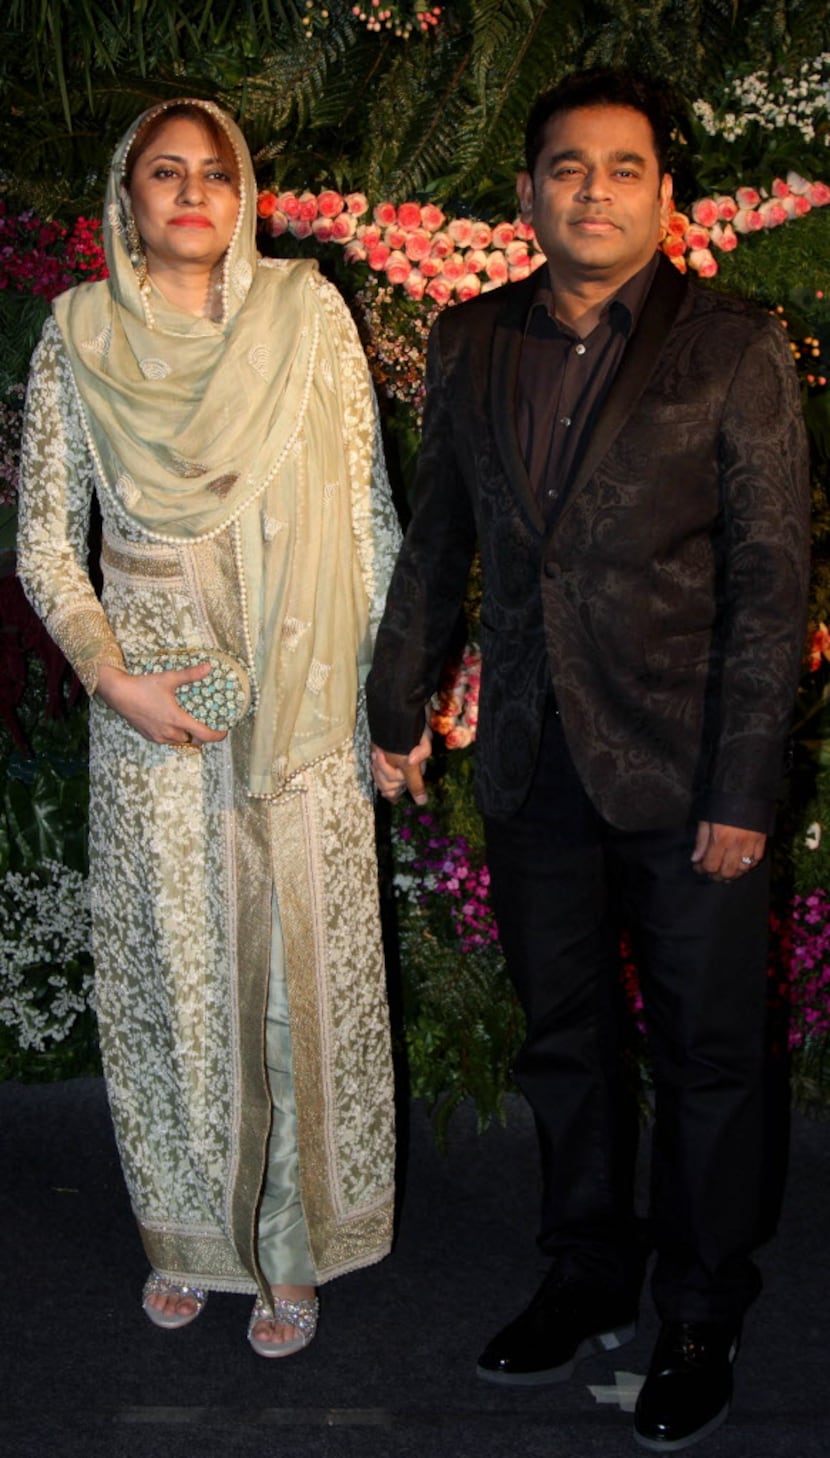 Indian film music composer and singer A.R. Rahman and his wife, Saira Banu.